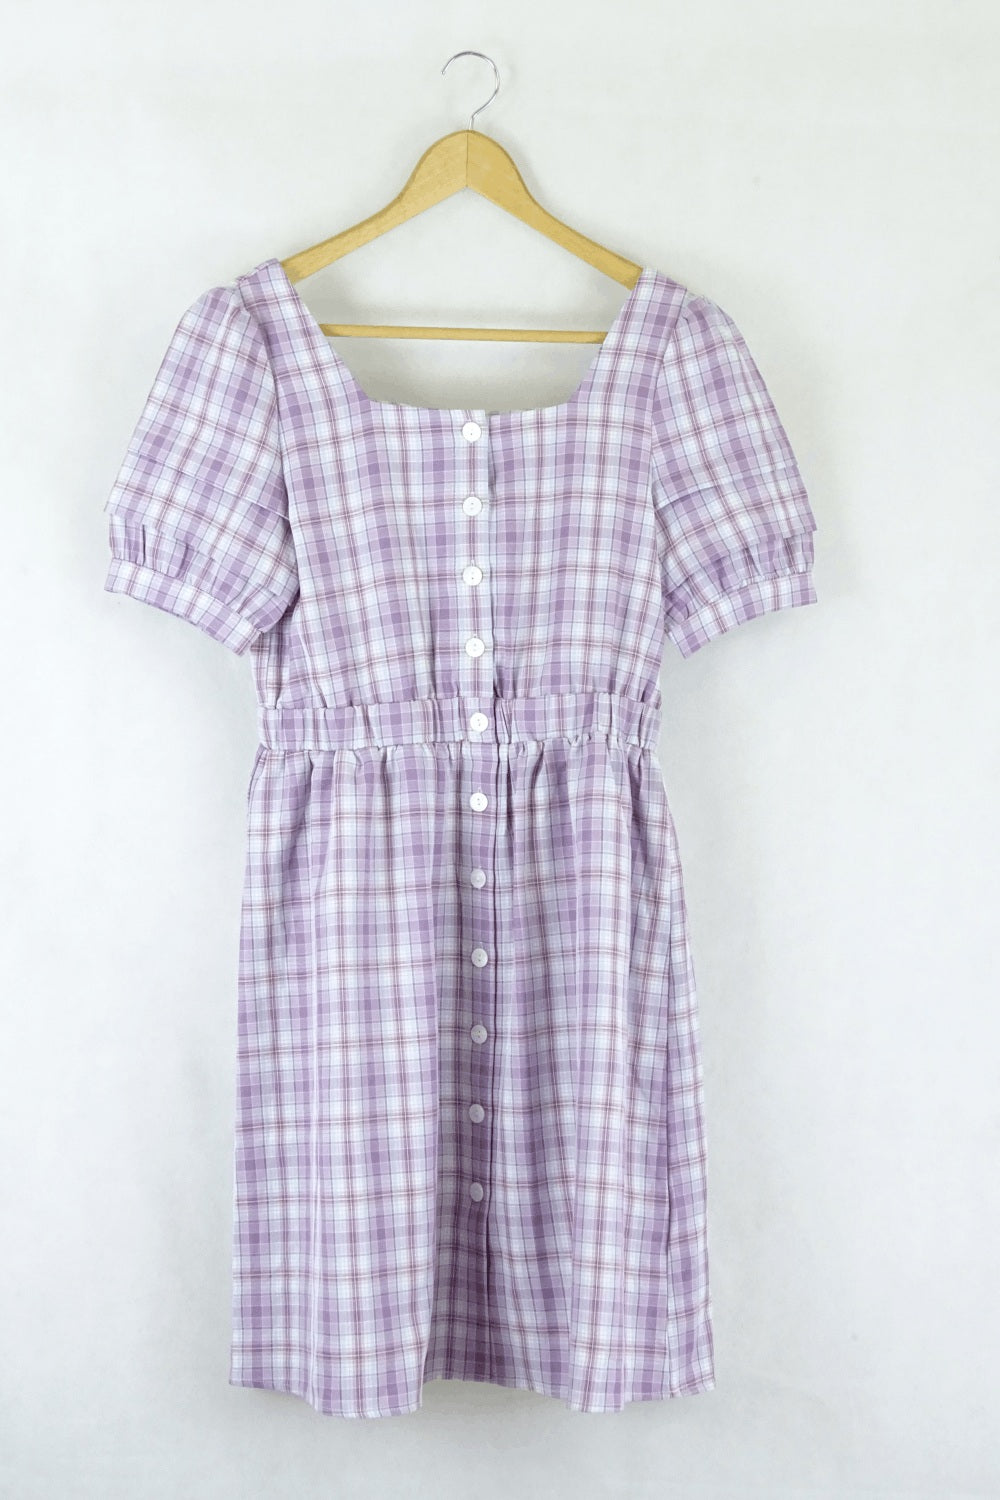 One More - Vintage Style Buttoned Down Checked Dress M